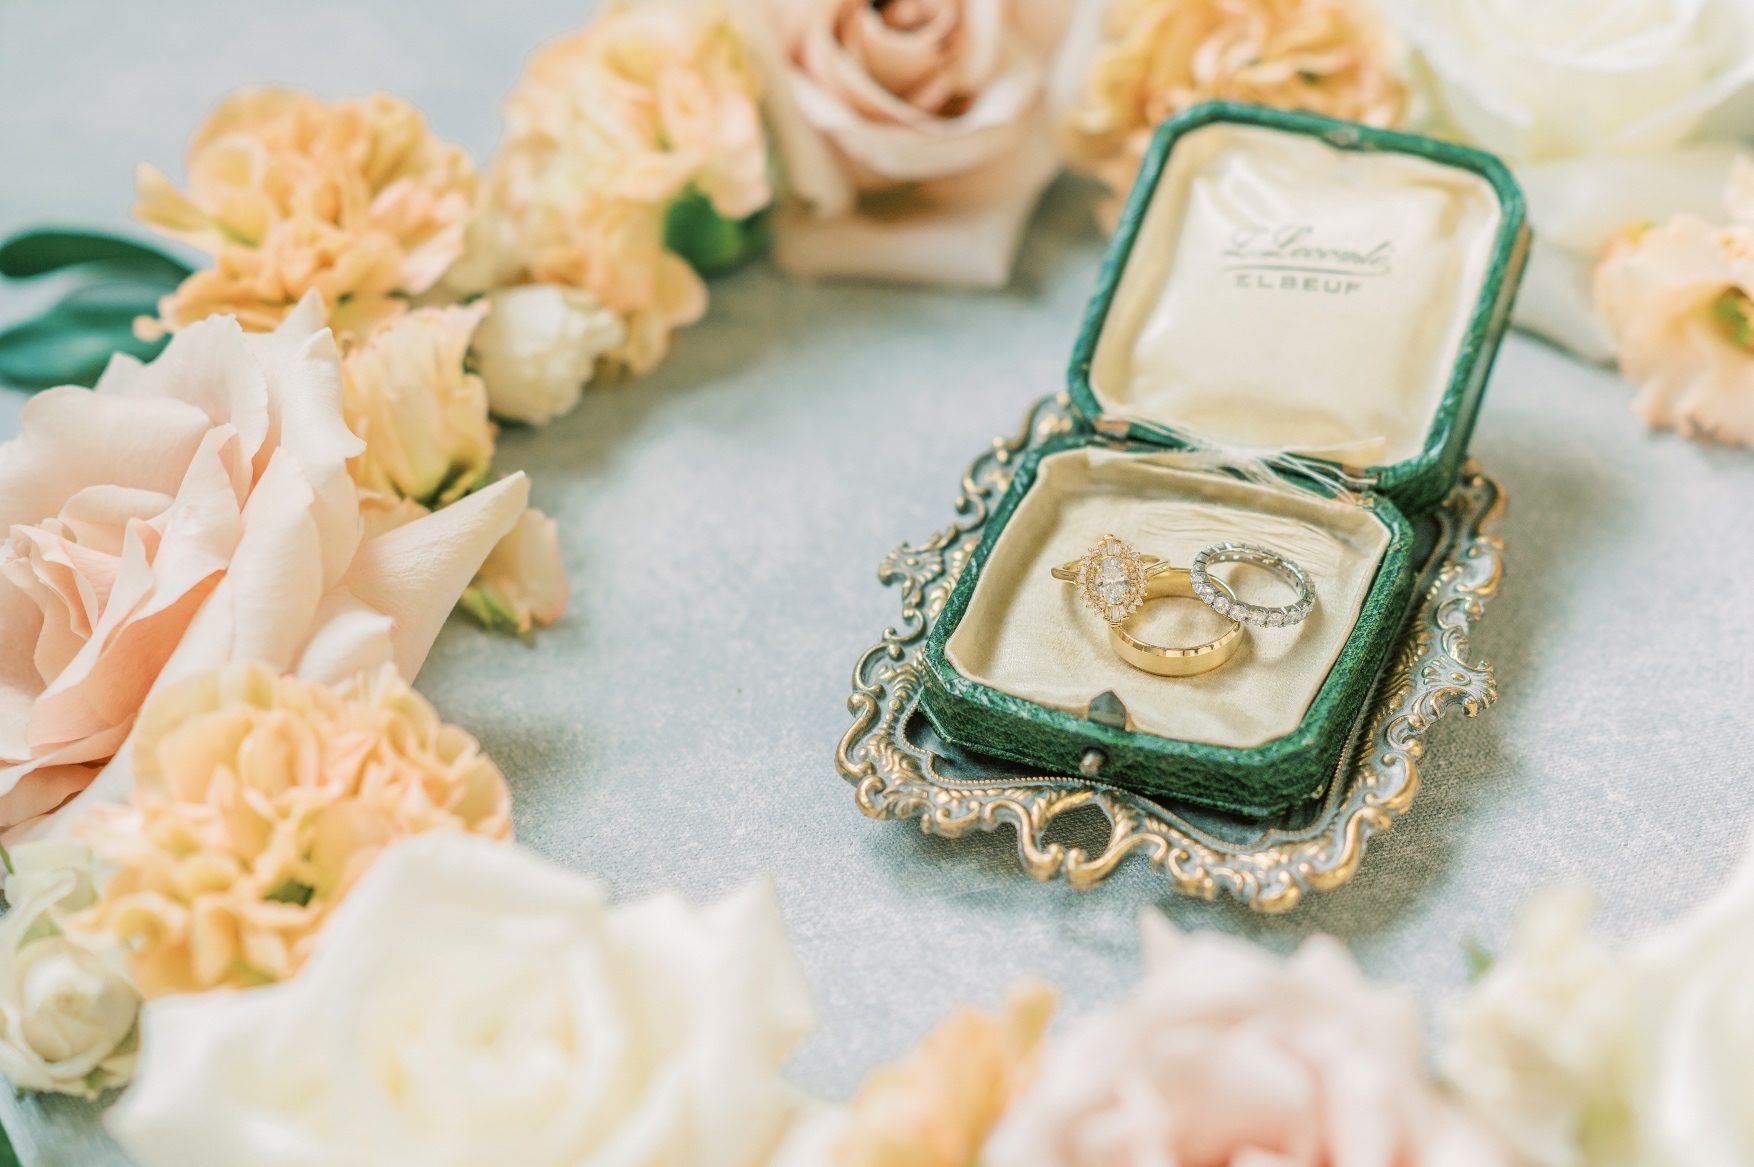 A pretty green jewelry box showcasing the brides ring and the wedding bands with a ring of flowers surrounding them.